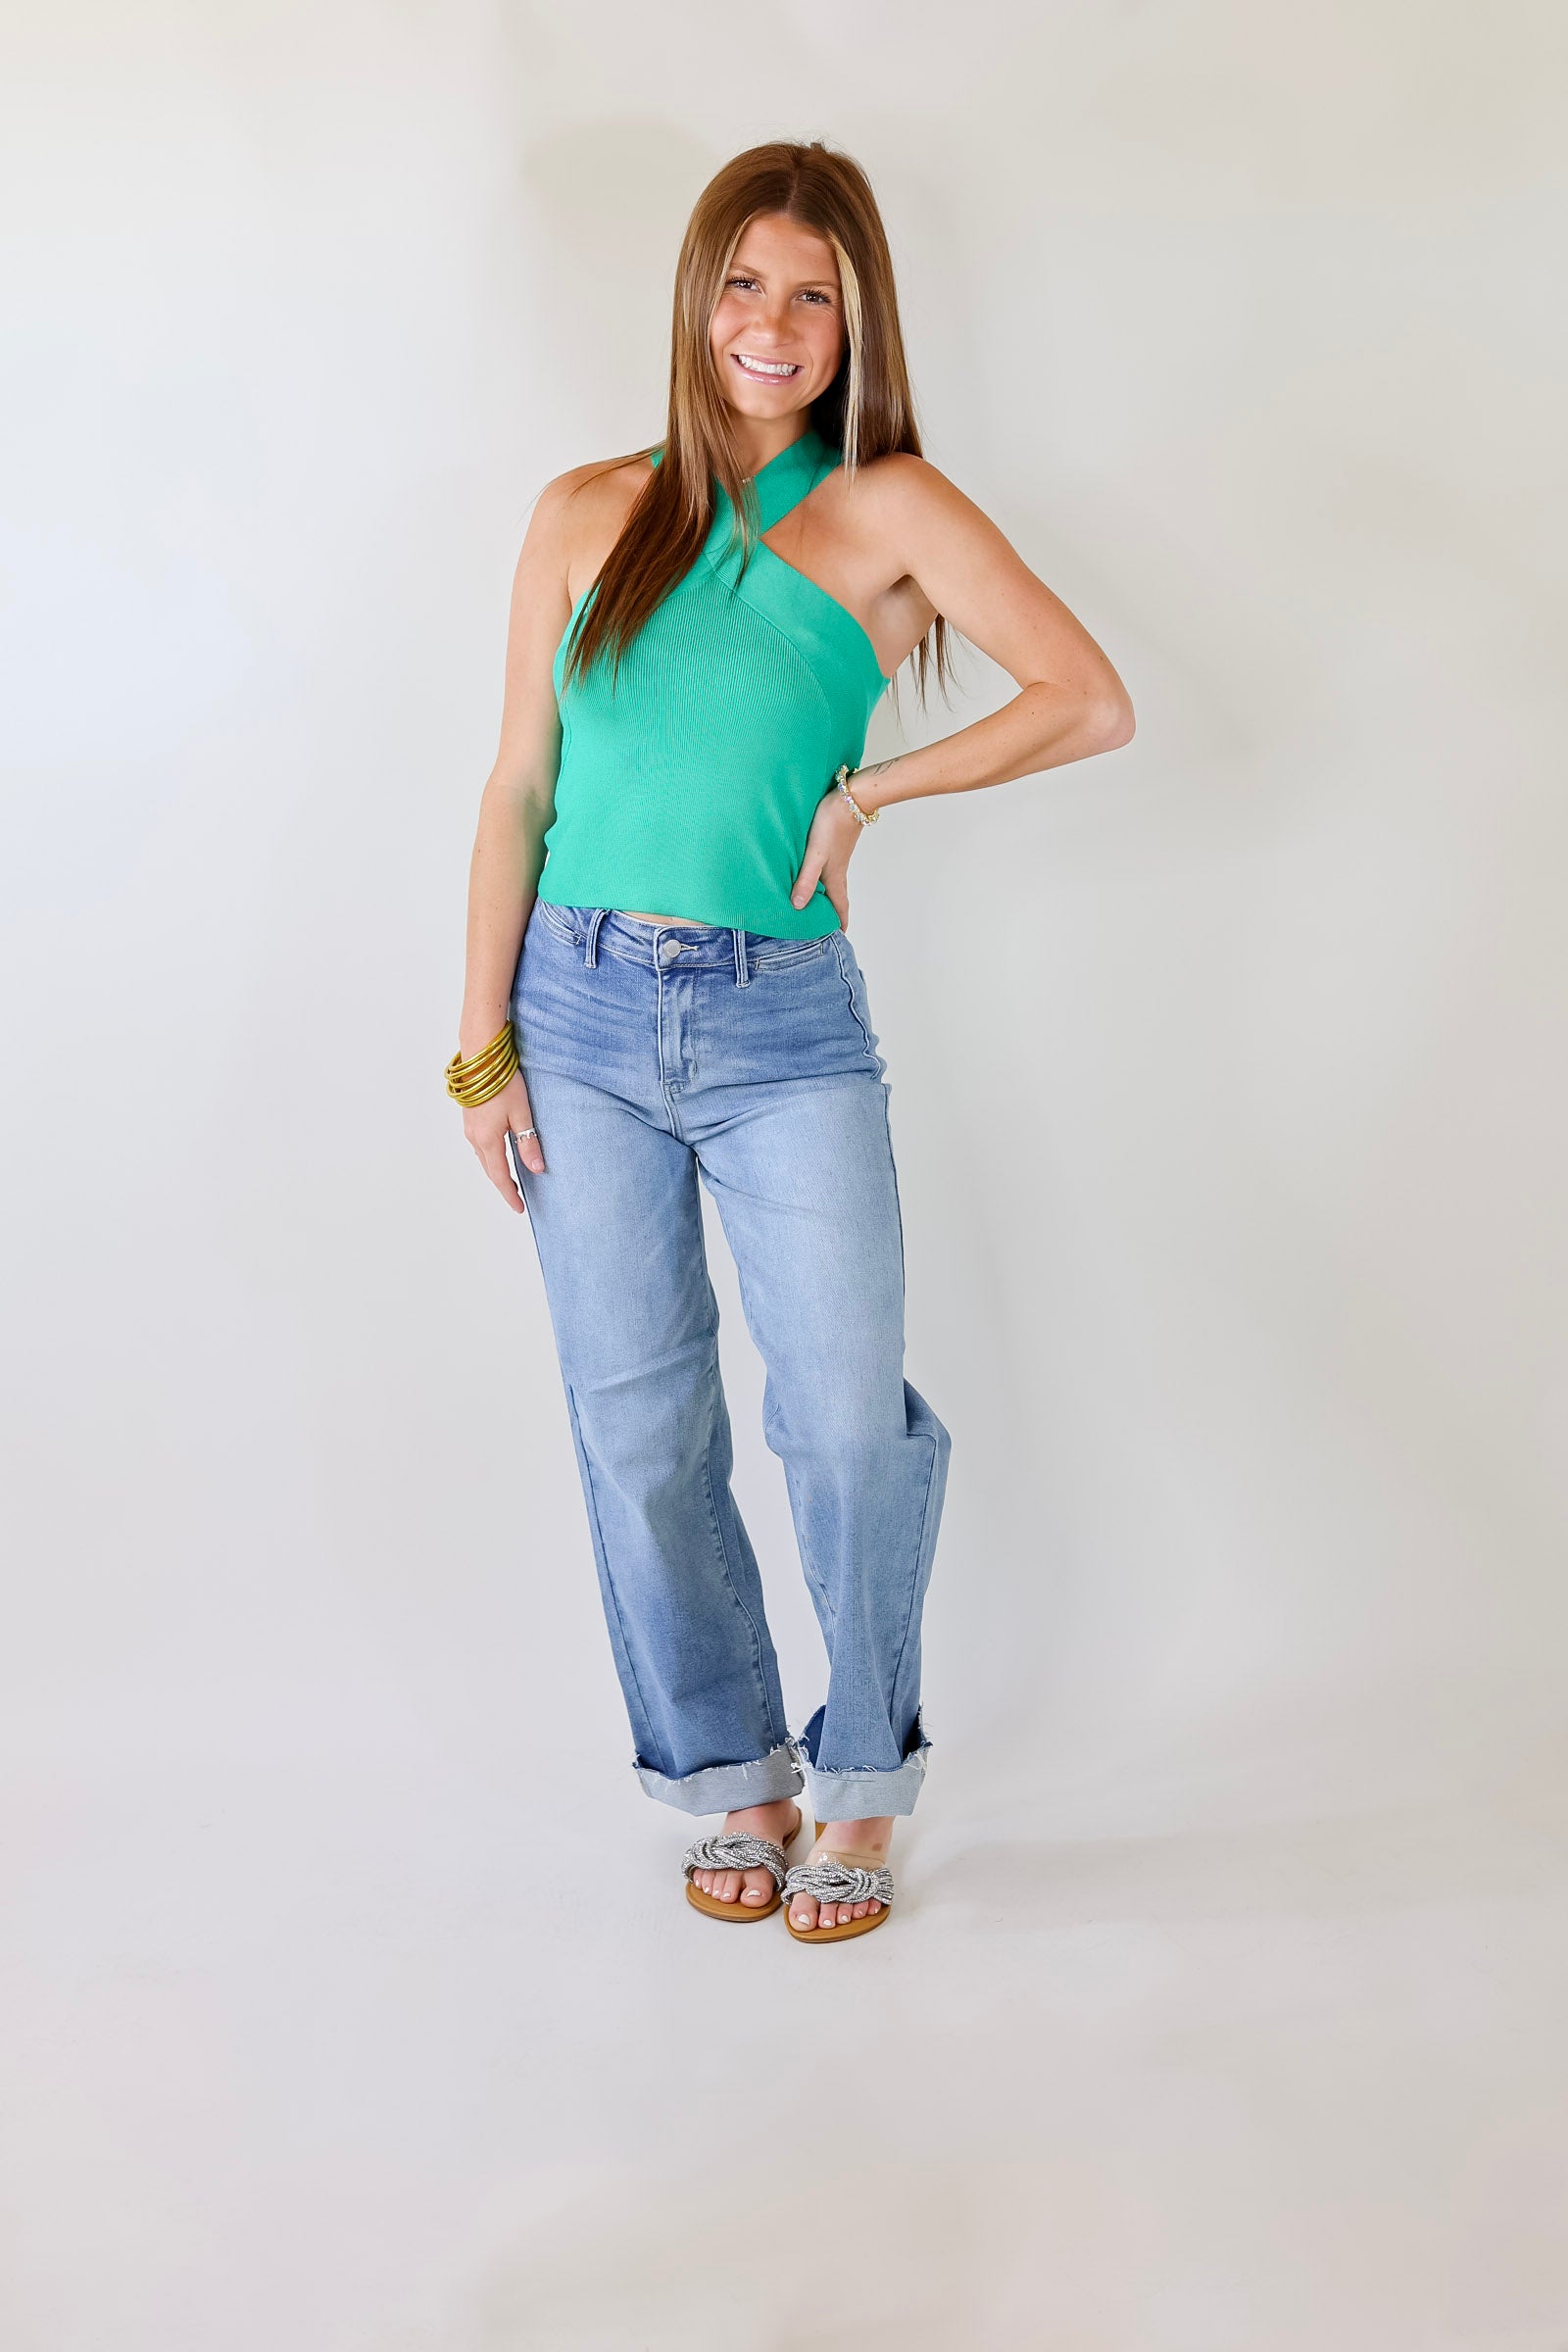 Talk To Me Crossed Strap Top in Green - Giddy Up Glamour Boutique